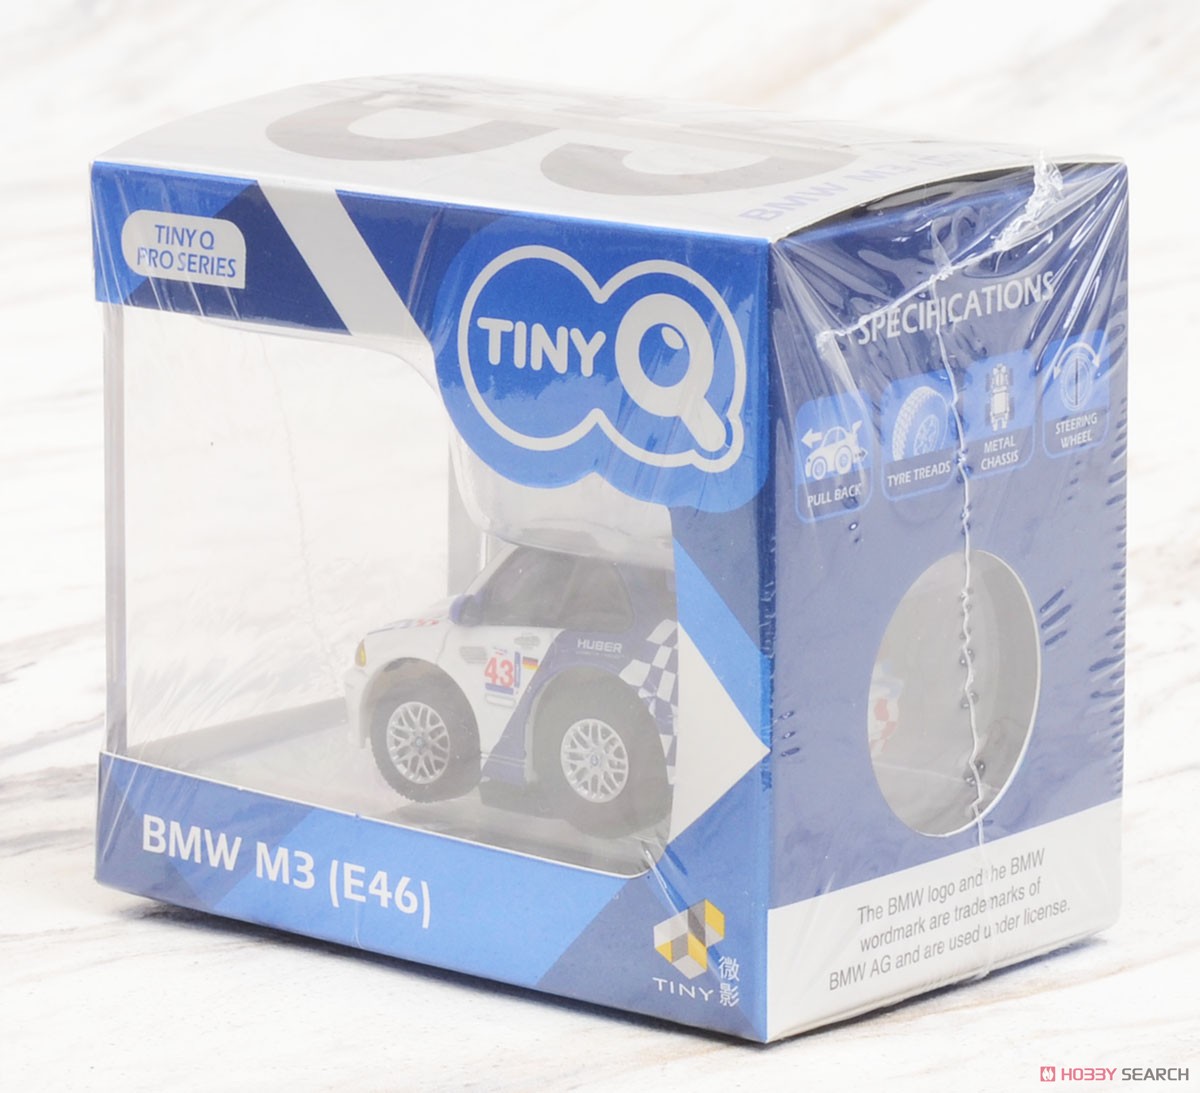 TinyQ BMW M3 E46 (No.43) (Toy) Package1